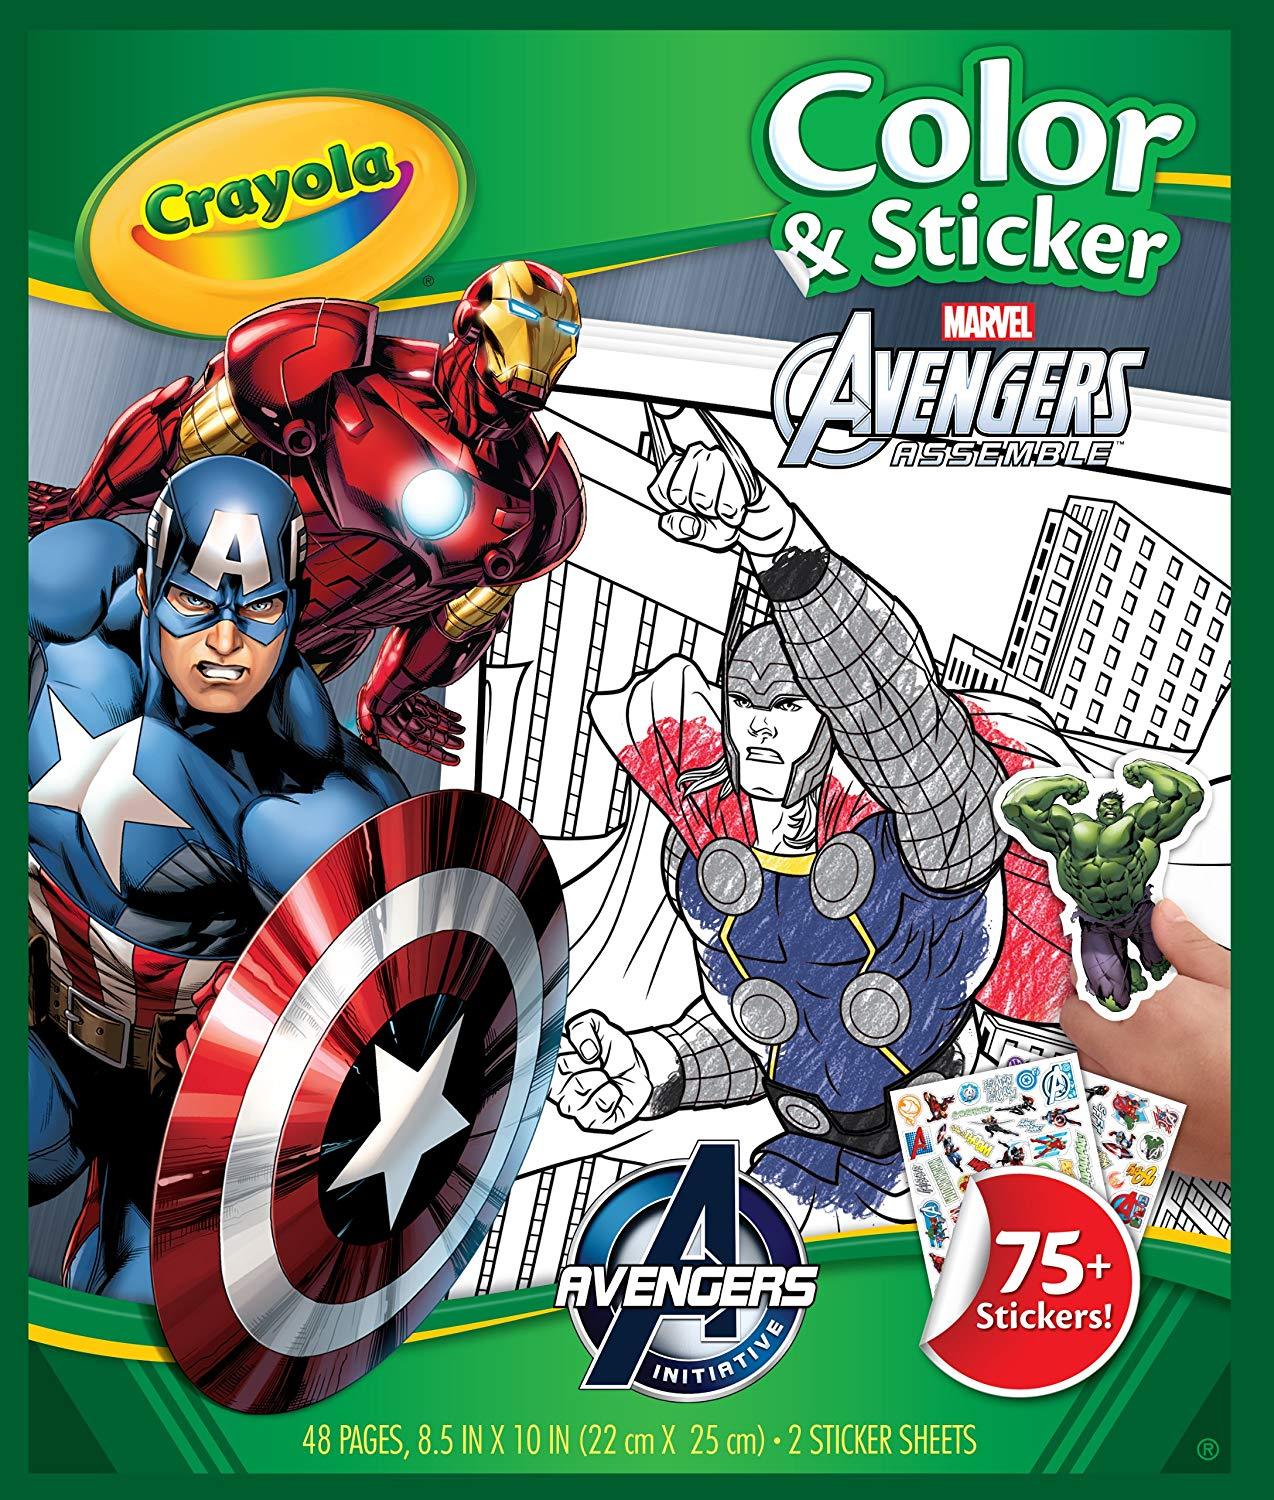 Crayola Avengers Color & Sticker Book, Gift Books for Kids, Age 3, 4, 5, 6 - $11.99